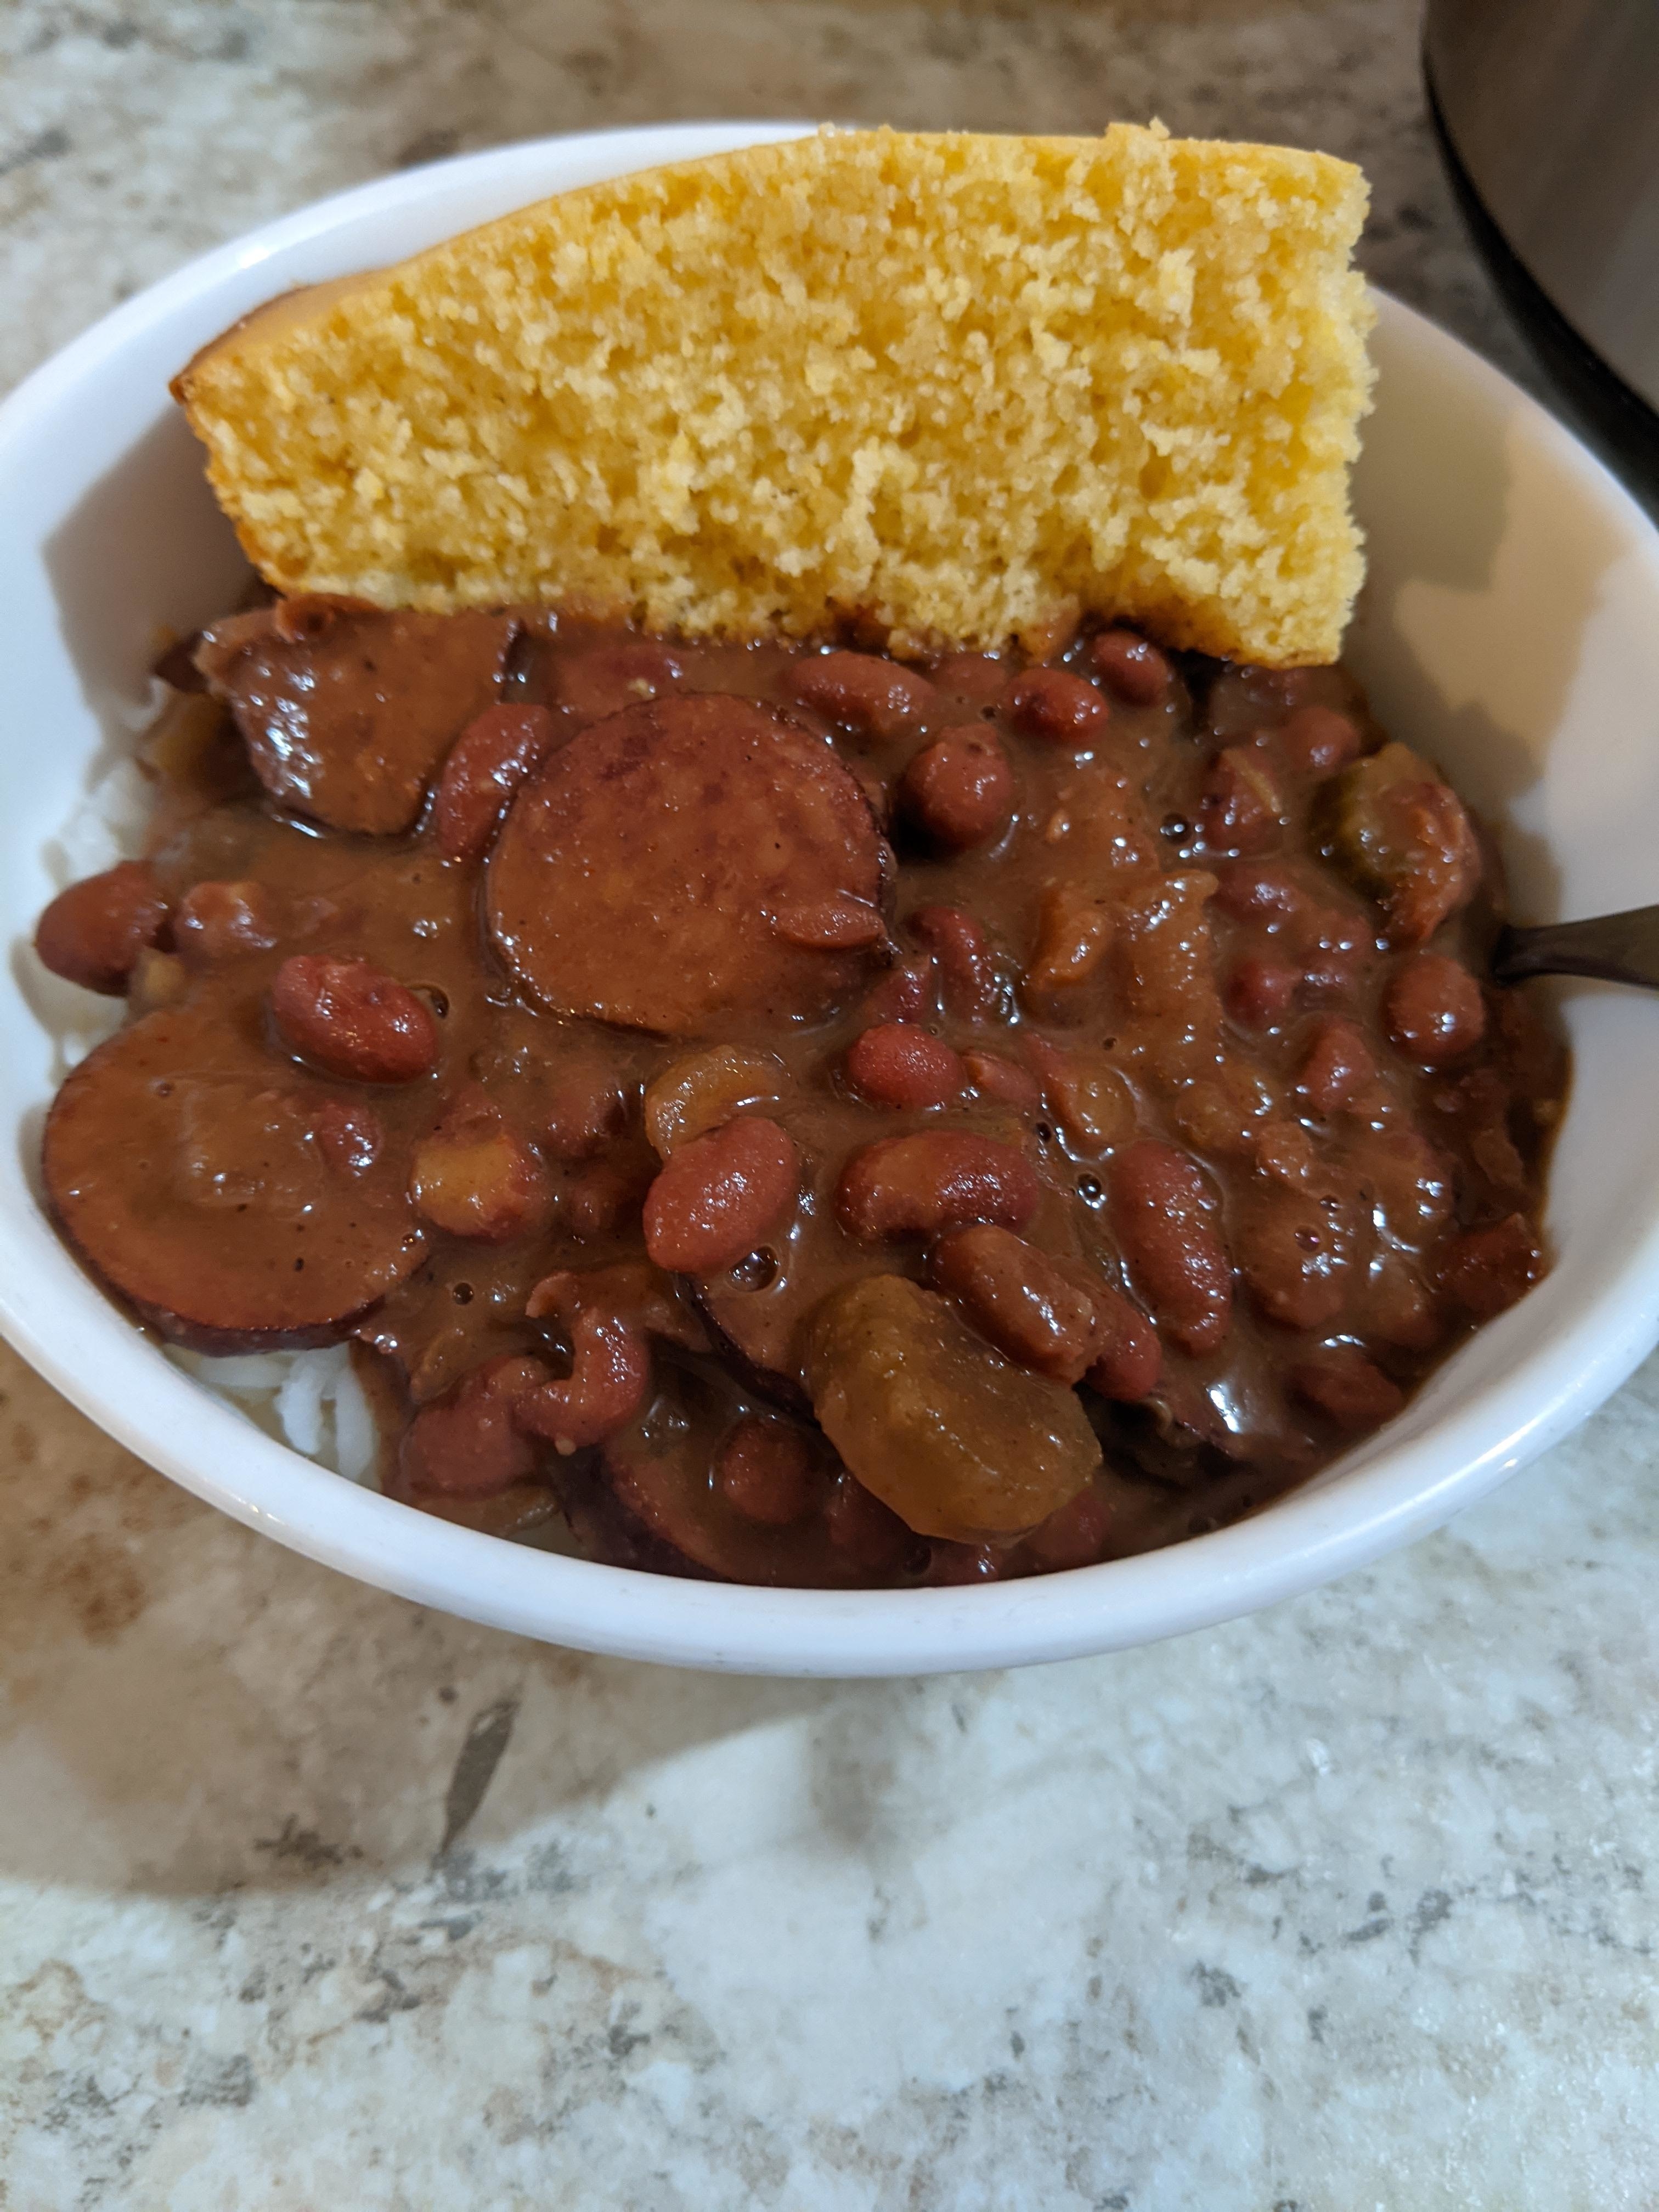 A bowl of beans and slices of sausage, with a piece of cornbread on the side